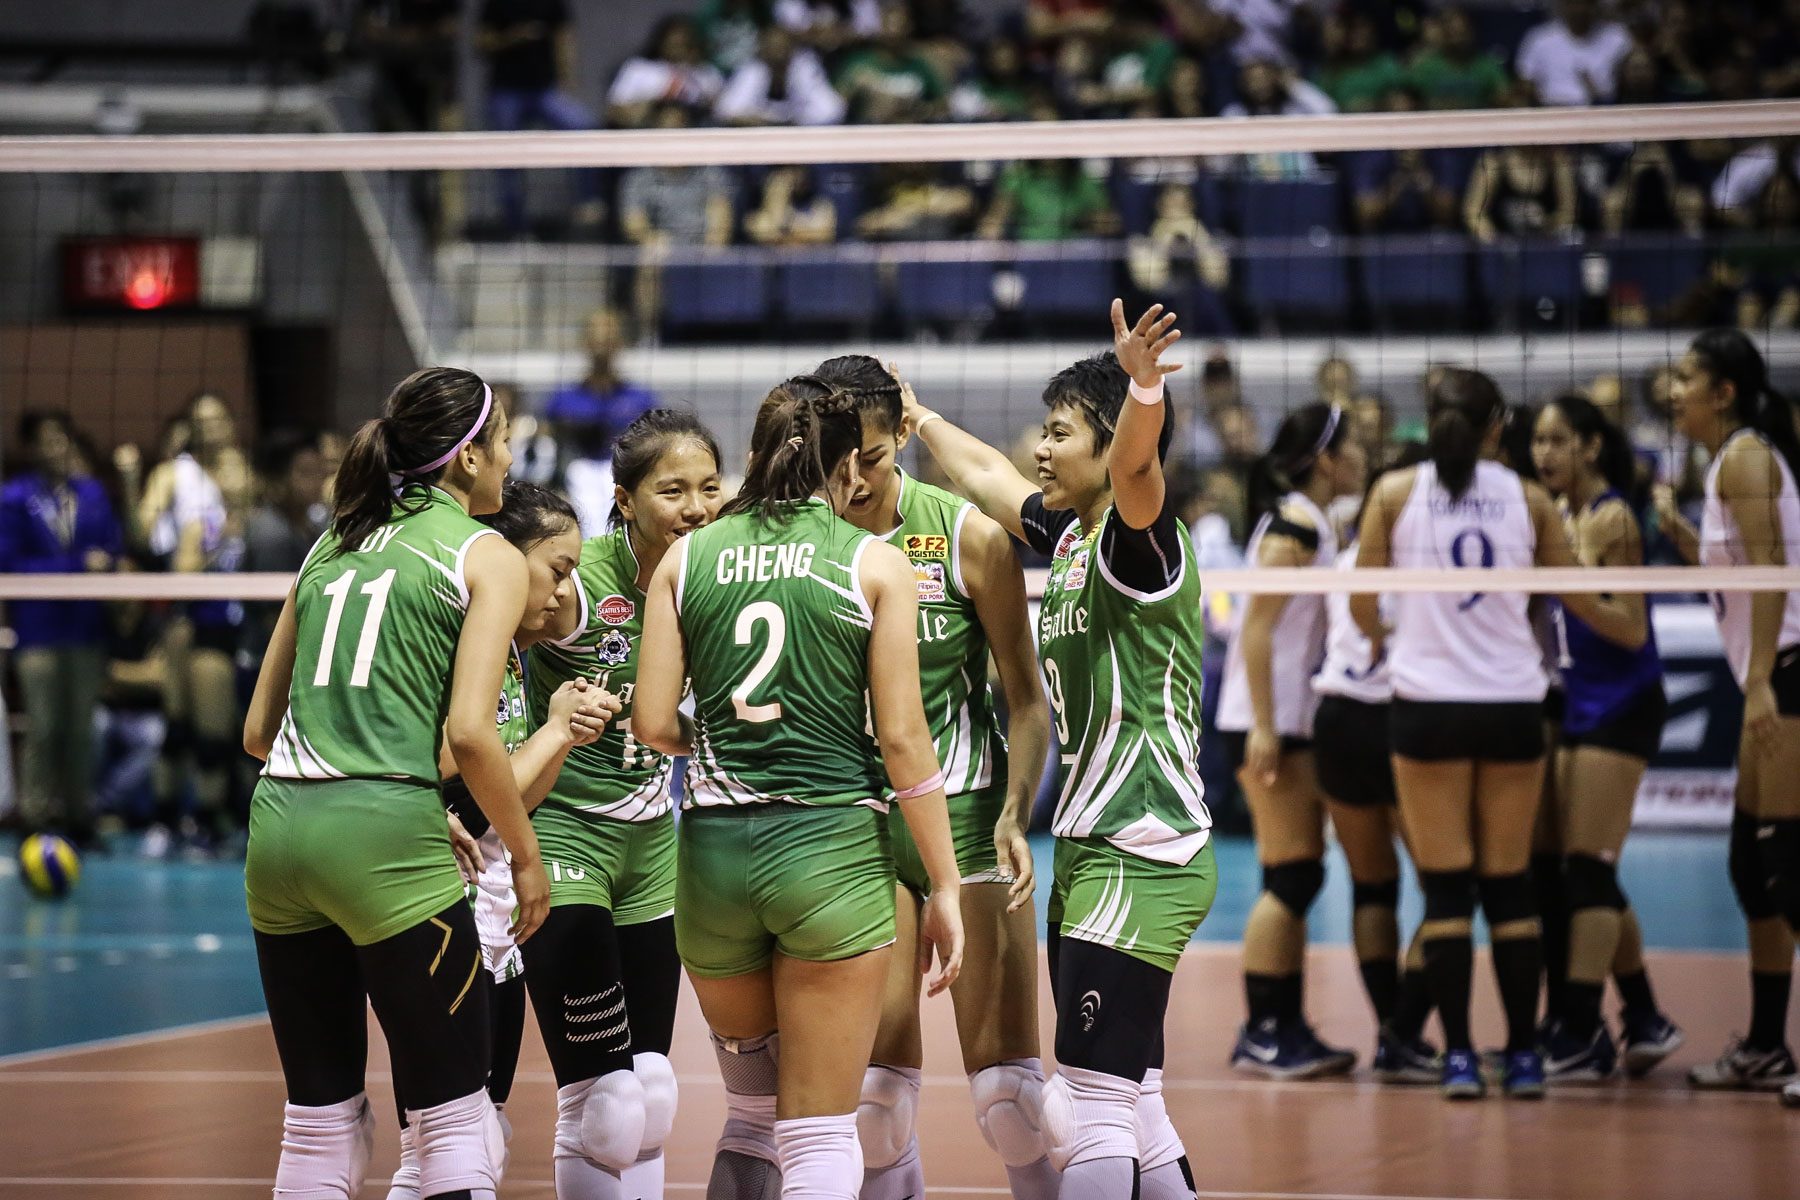 DLSU Lady Spikers outlast Ateneo Lady Eagles to ﻿﻿take Game 1 of UAAP Finals